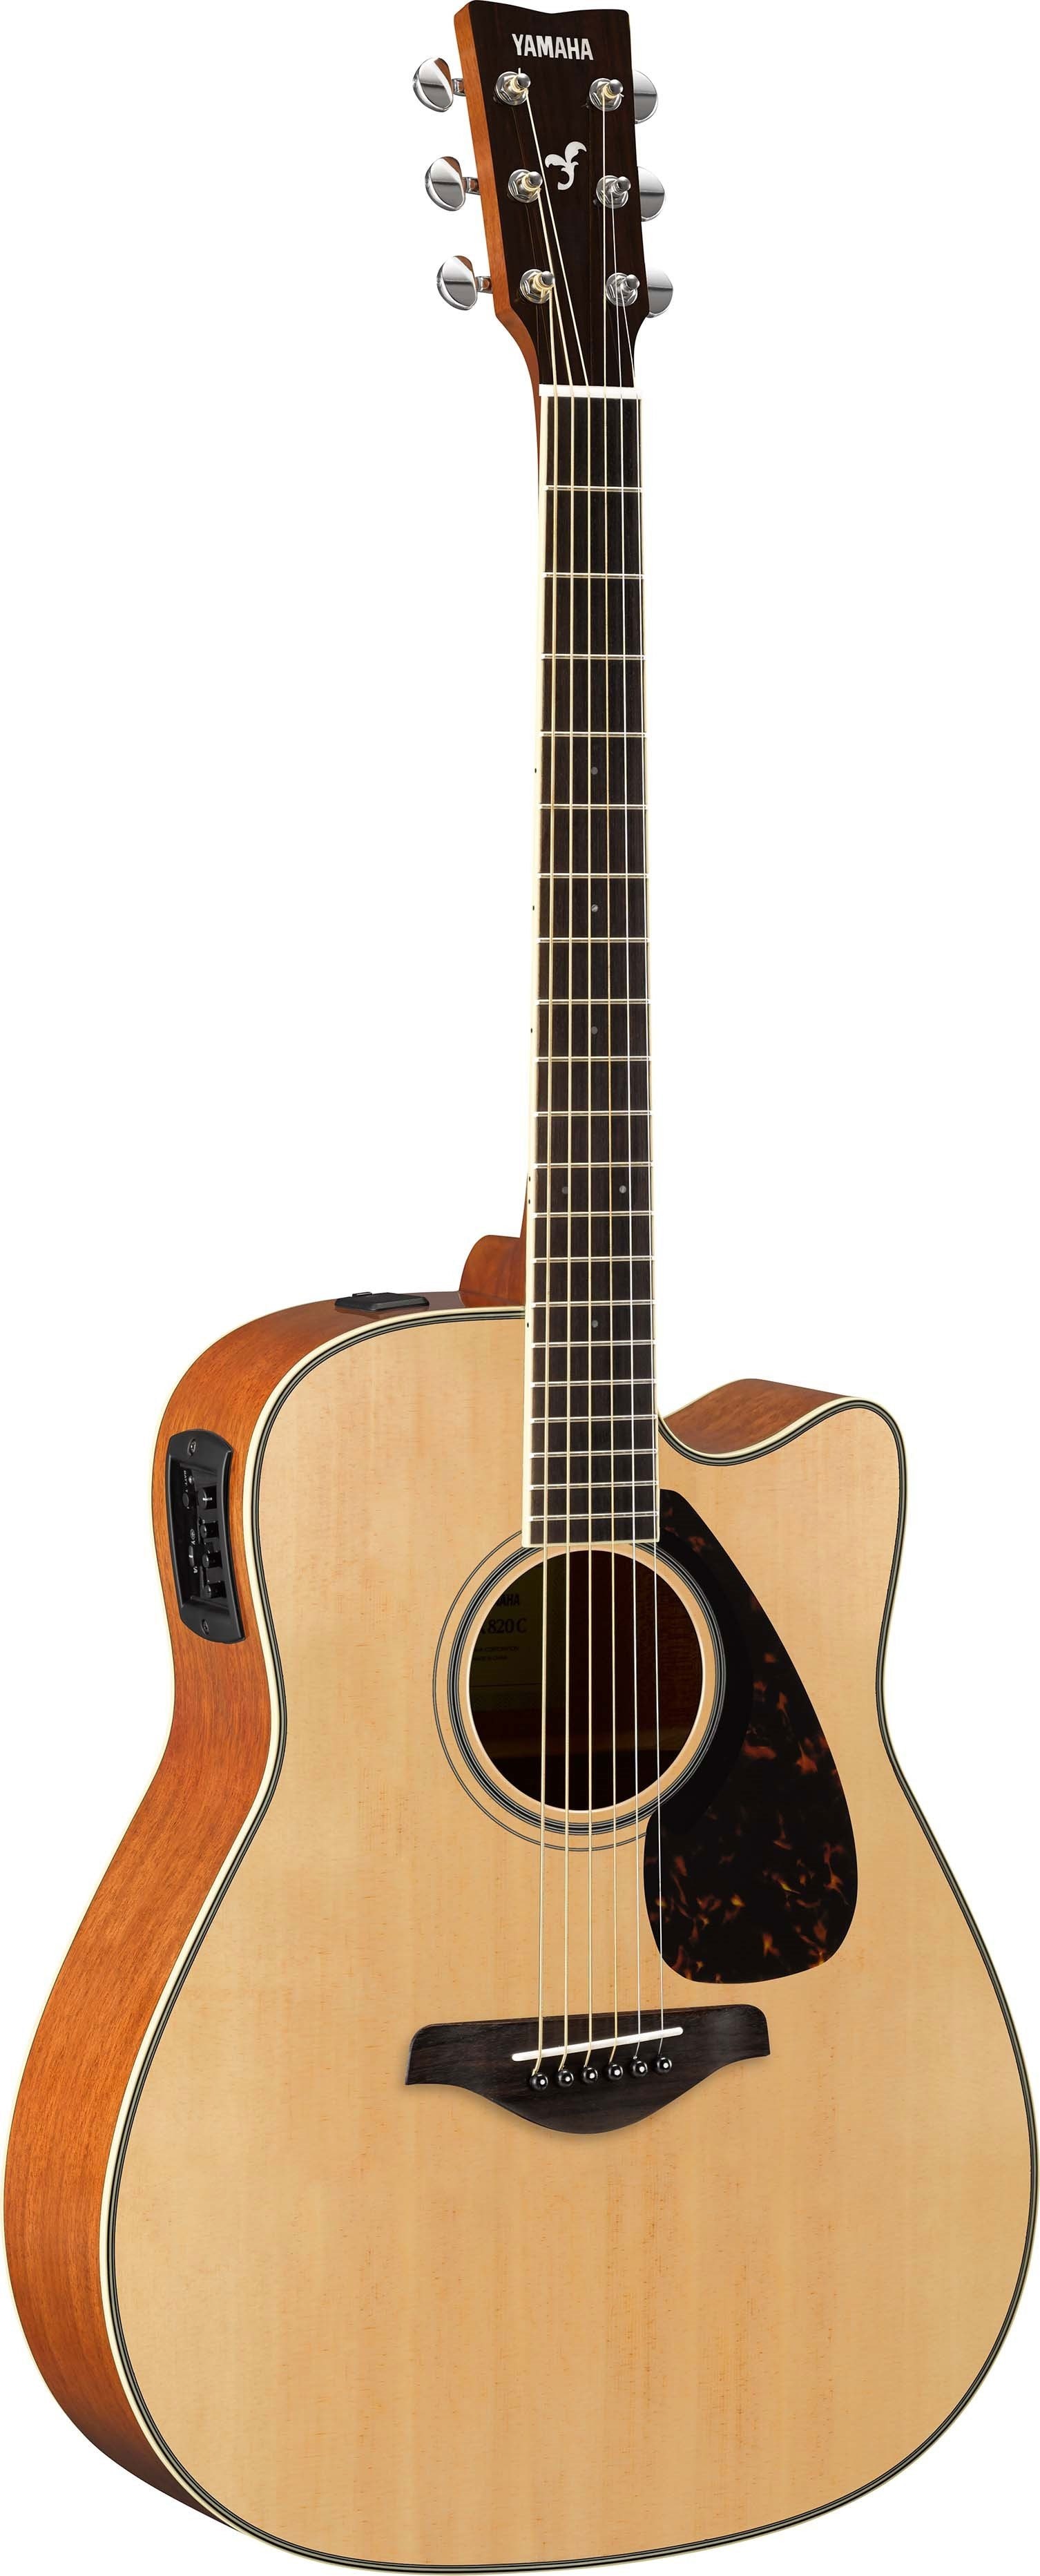 FG / FGX Series - Overview - FG Series - Acoustic Guitars - Guitars 